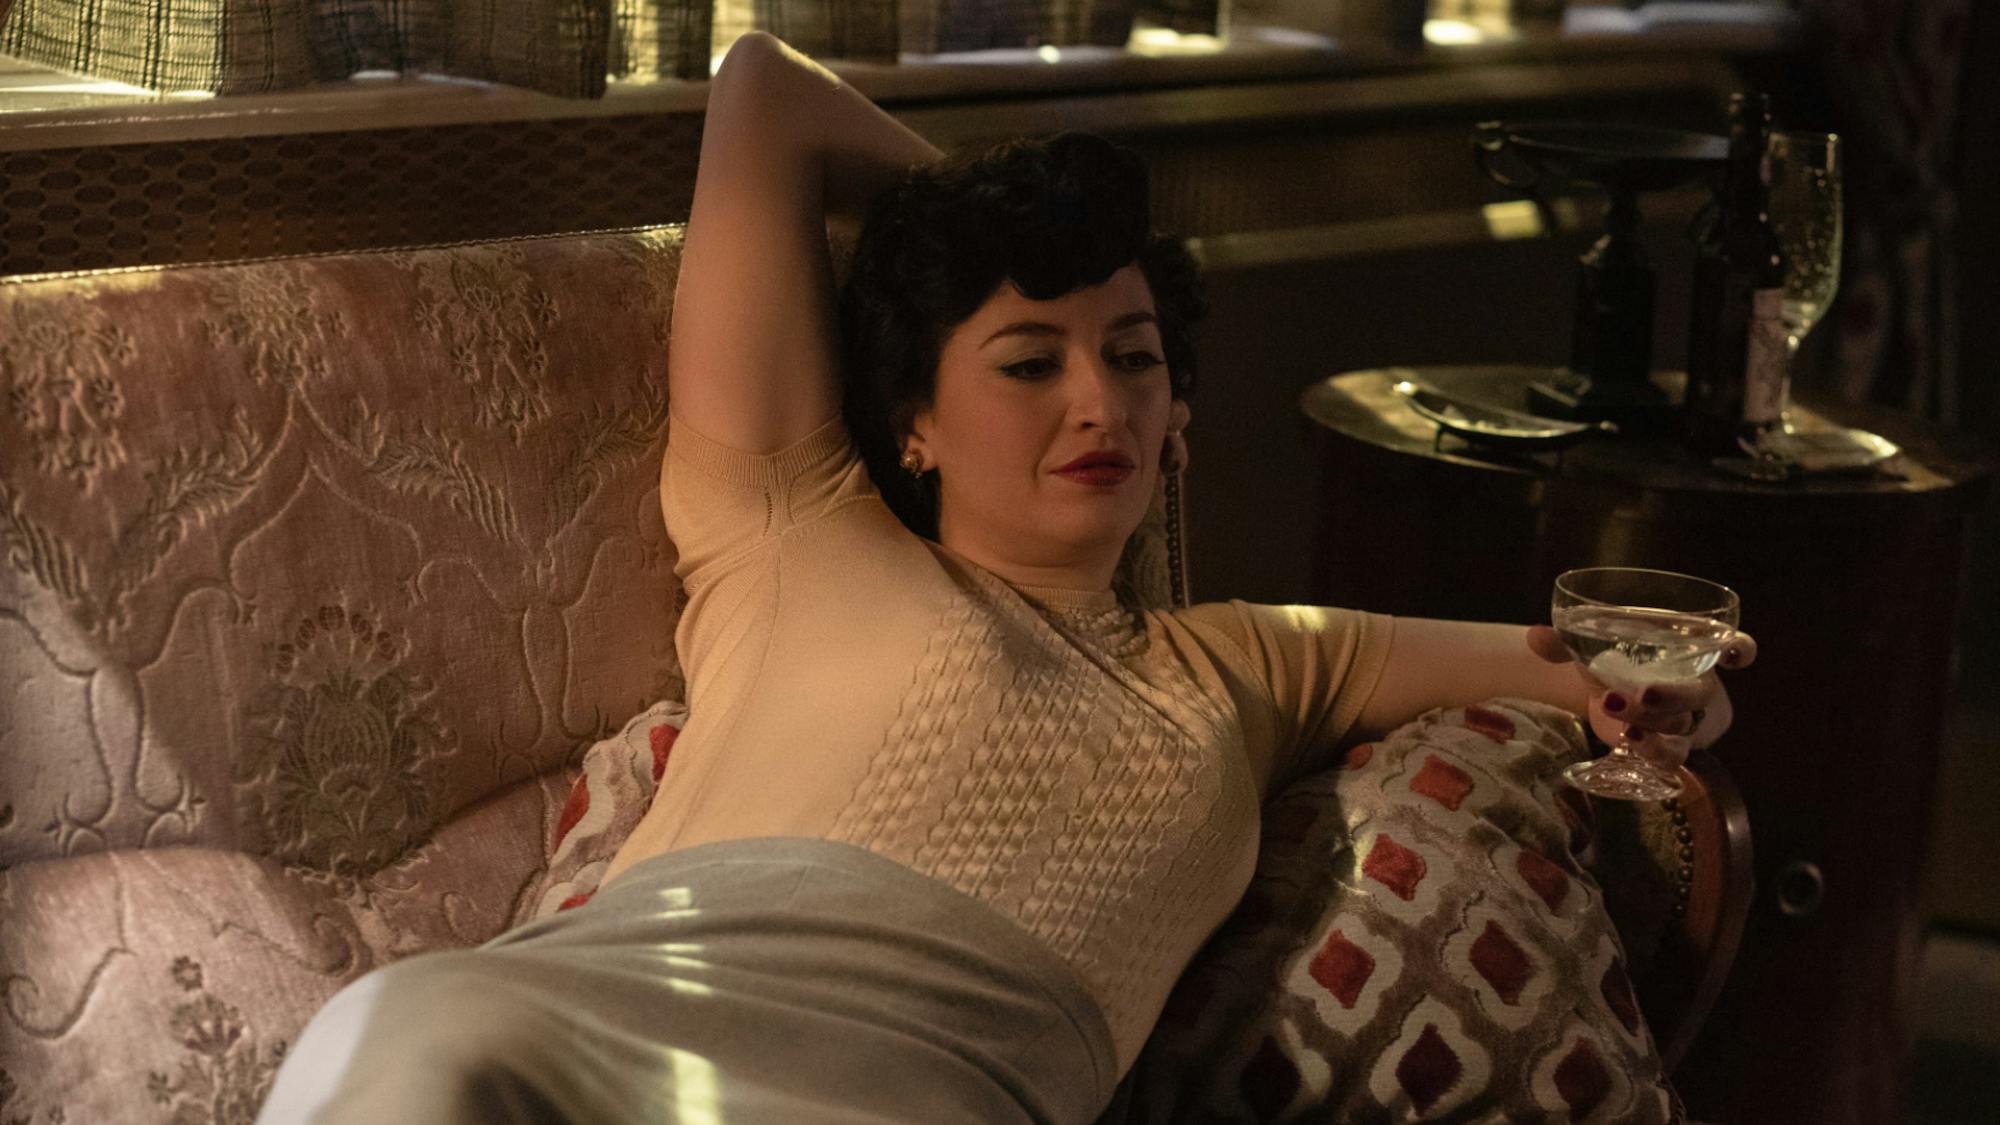 Alma Wheatley, played by Marielle Heller, relaxes on a multicolored couch drinking a cocktail. She wears a white shirt and a light blue latex skirt.